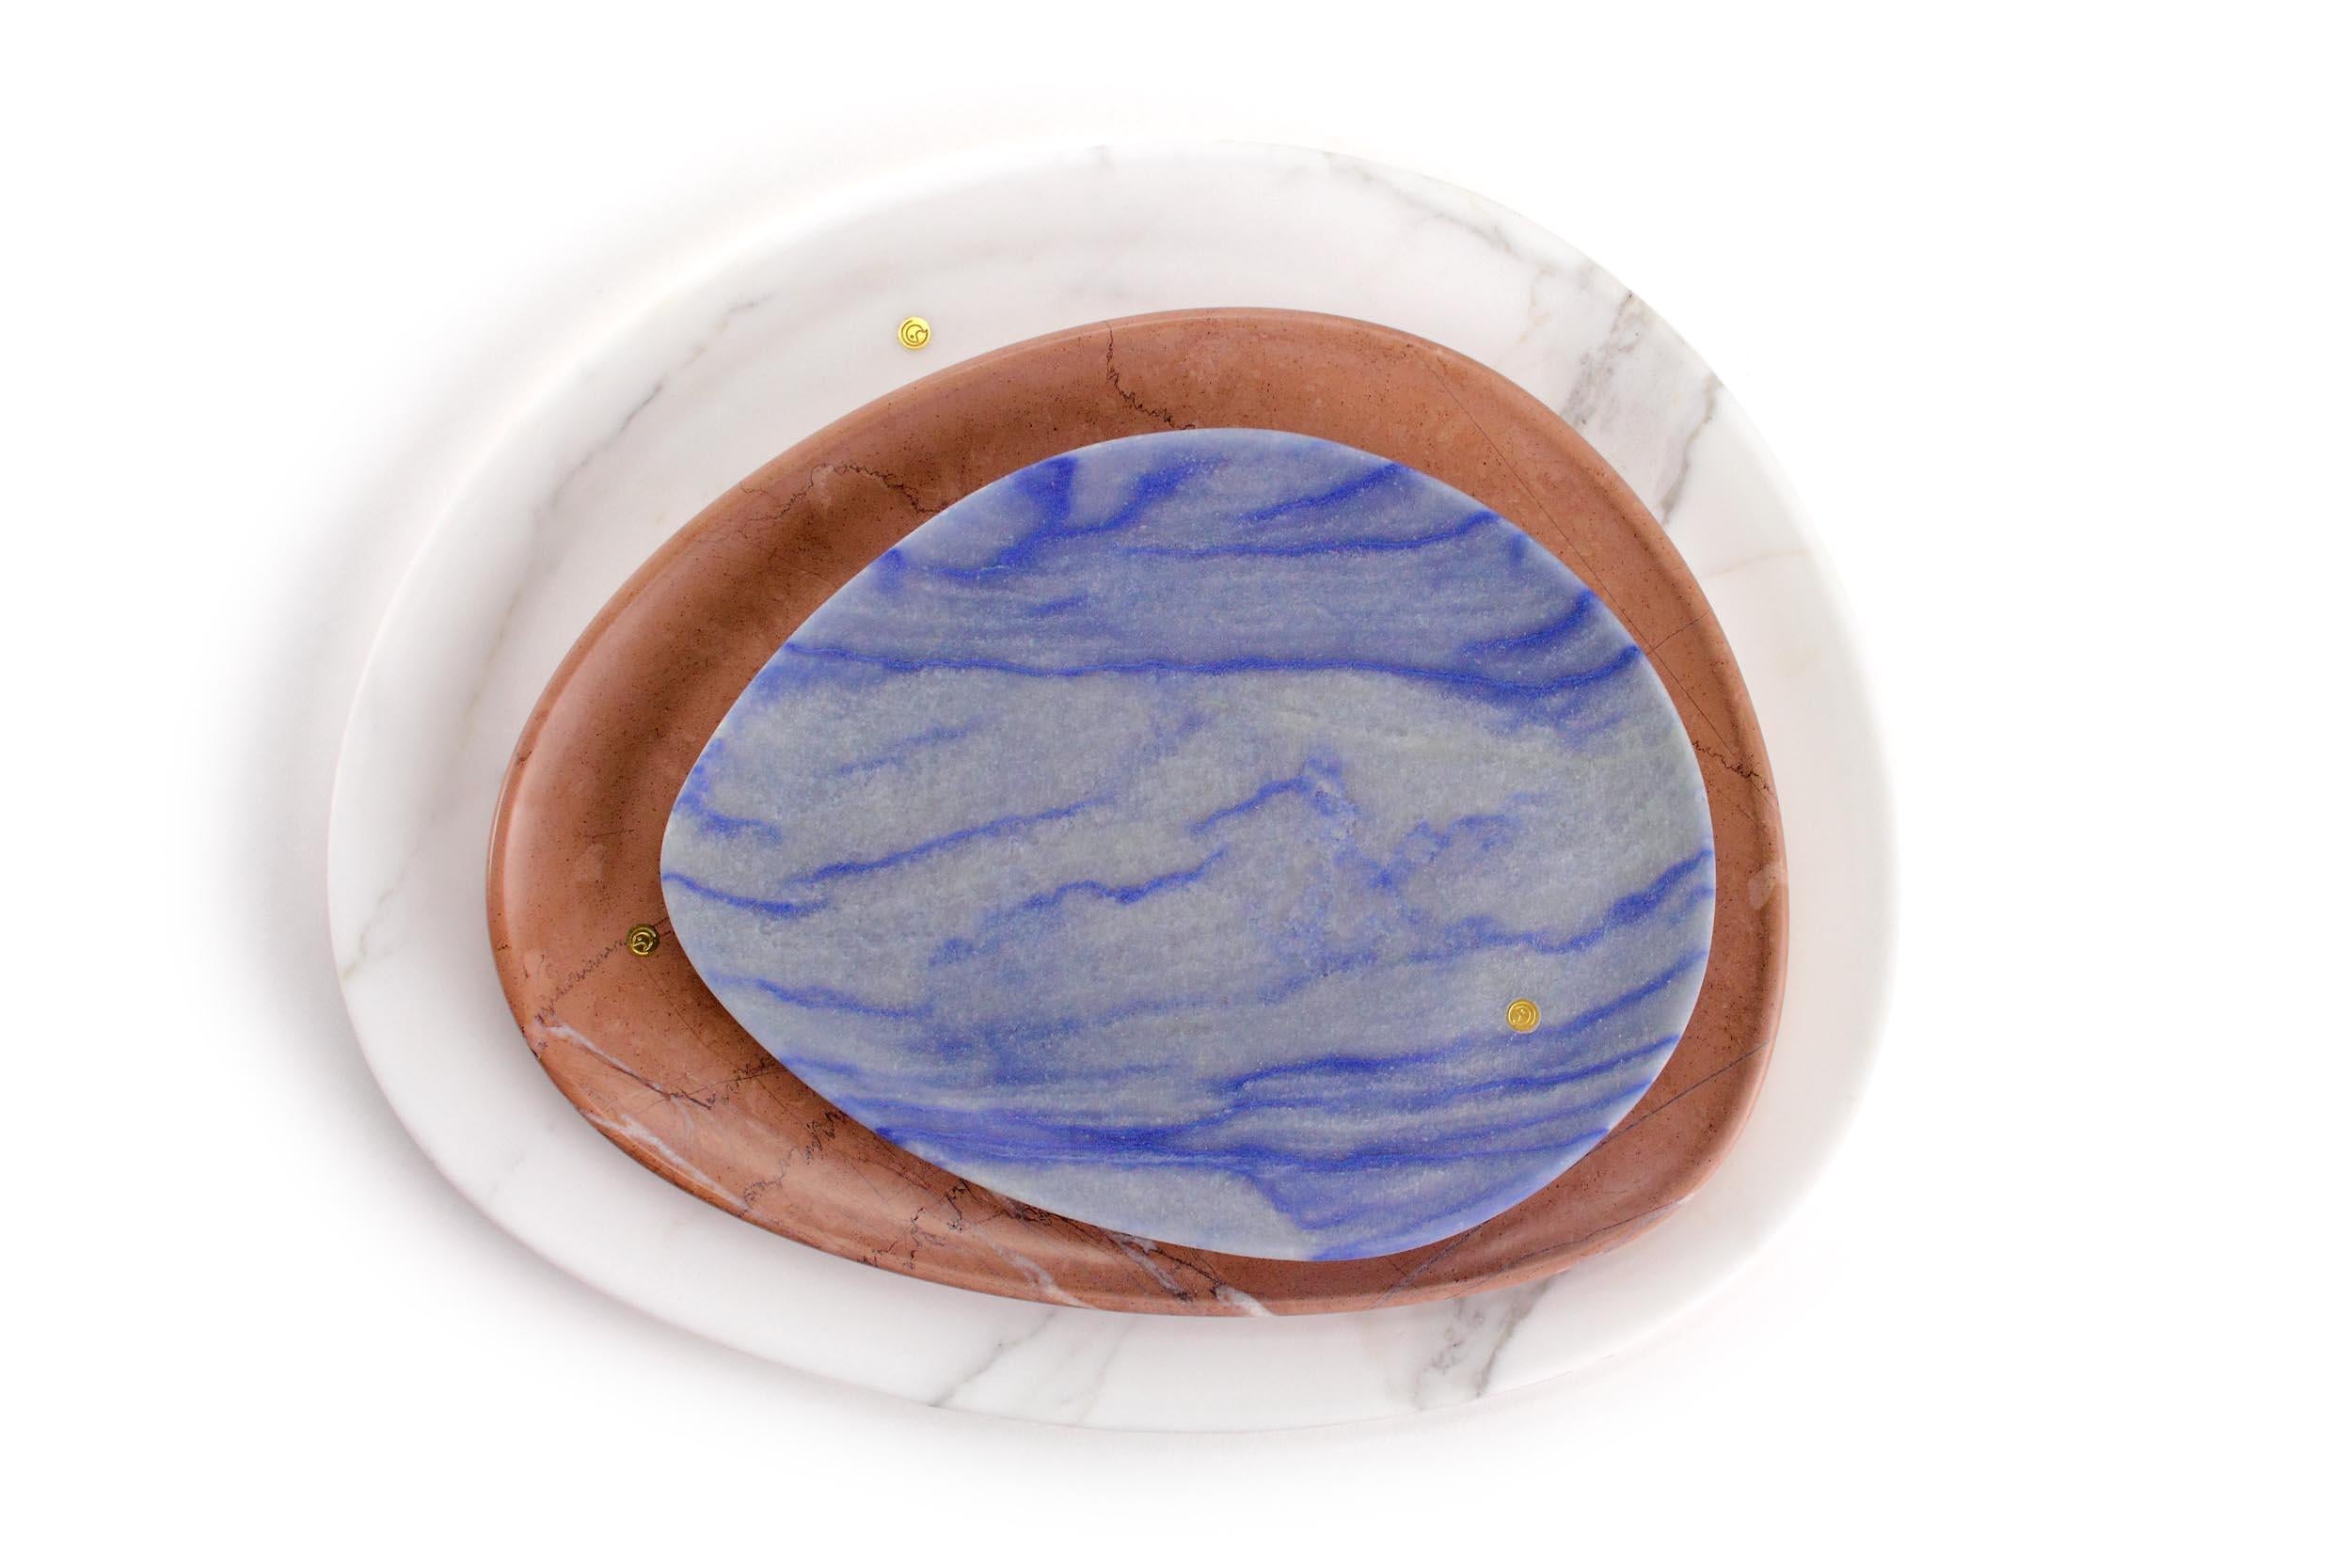 Hand carved presentation plates in Azul Macaubas Quartzite, Pink Assisi stone and Statuary Marble. Multiple use as plates, platters and placers. 

Dimensions: Small - L24 W20 H1.8 cm, Medium - L30 W28 H1.8 cm, Big - L36 W35 H1.8 cm.
Available in